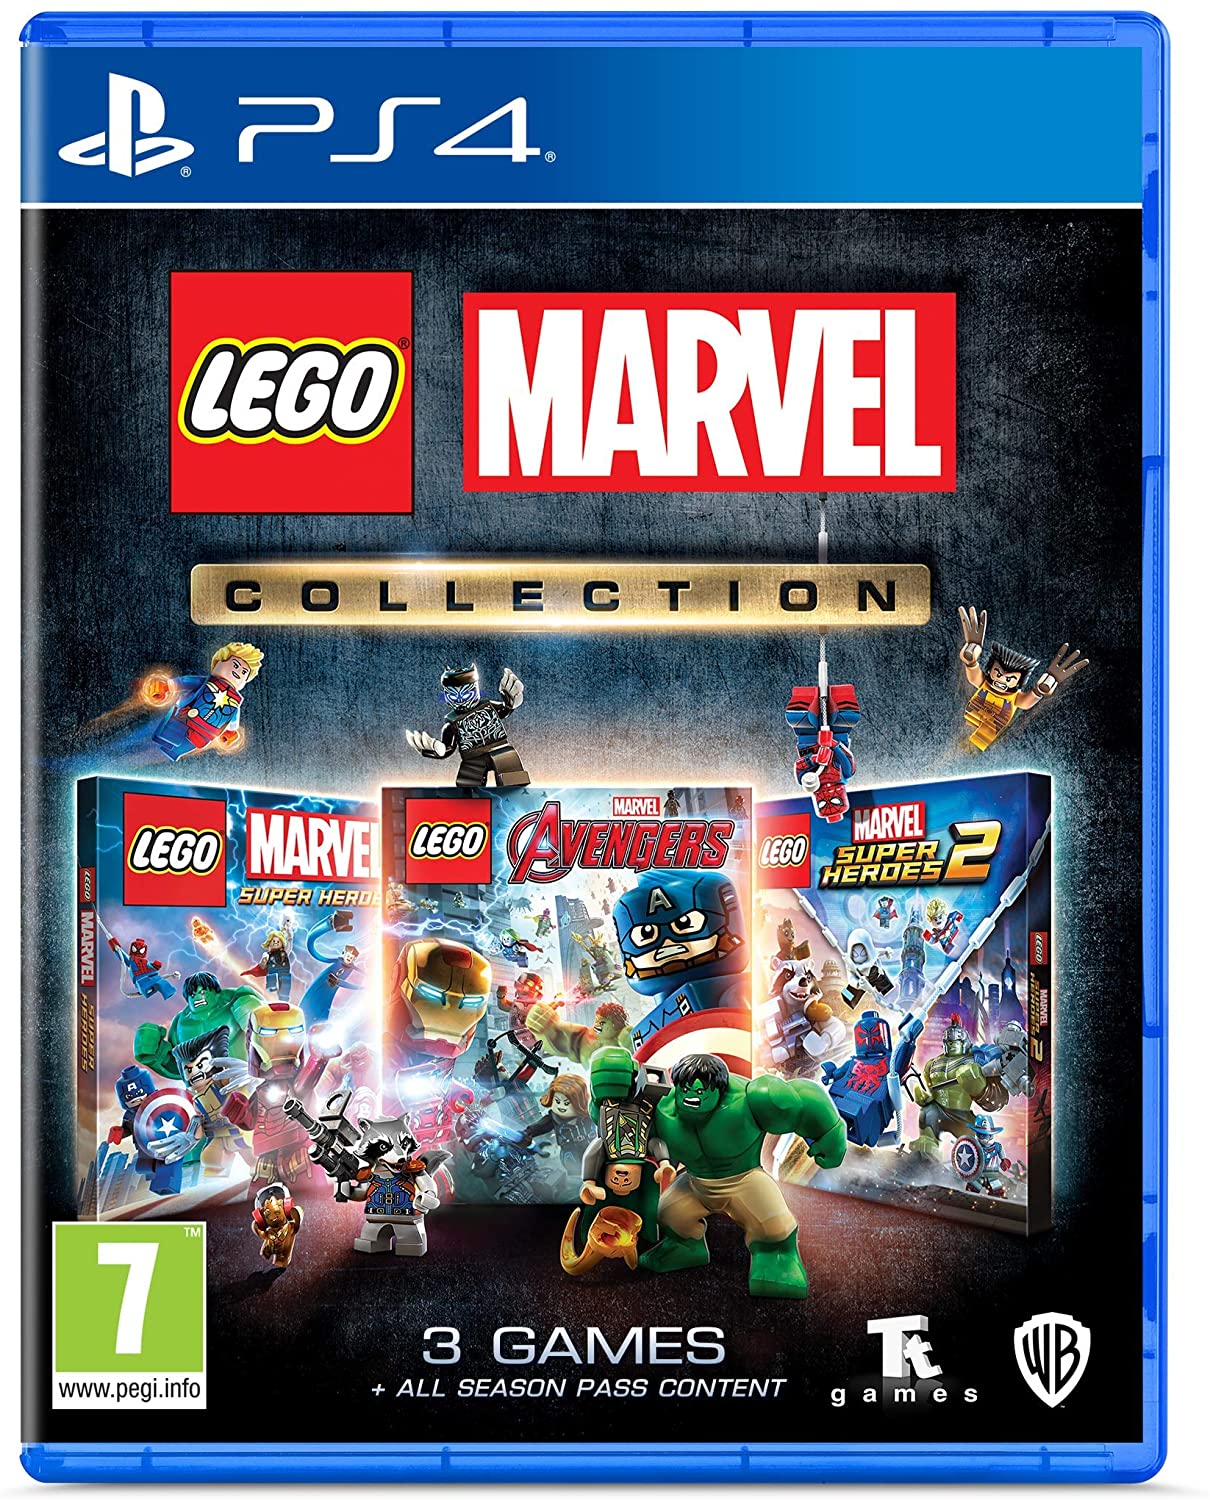 LEGO Marvel Collection - 3 Video Games (PS4)